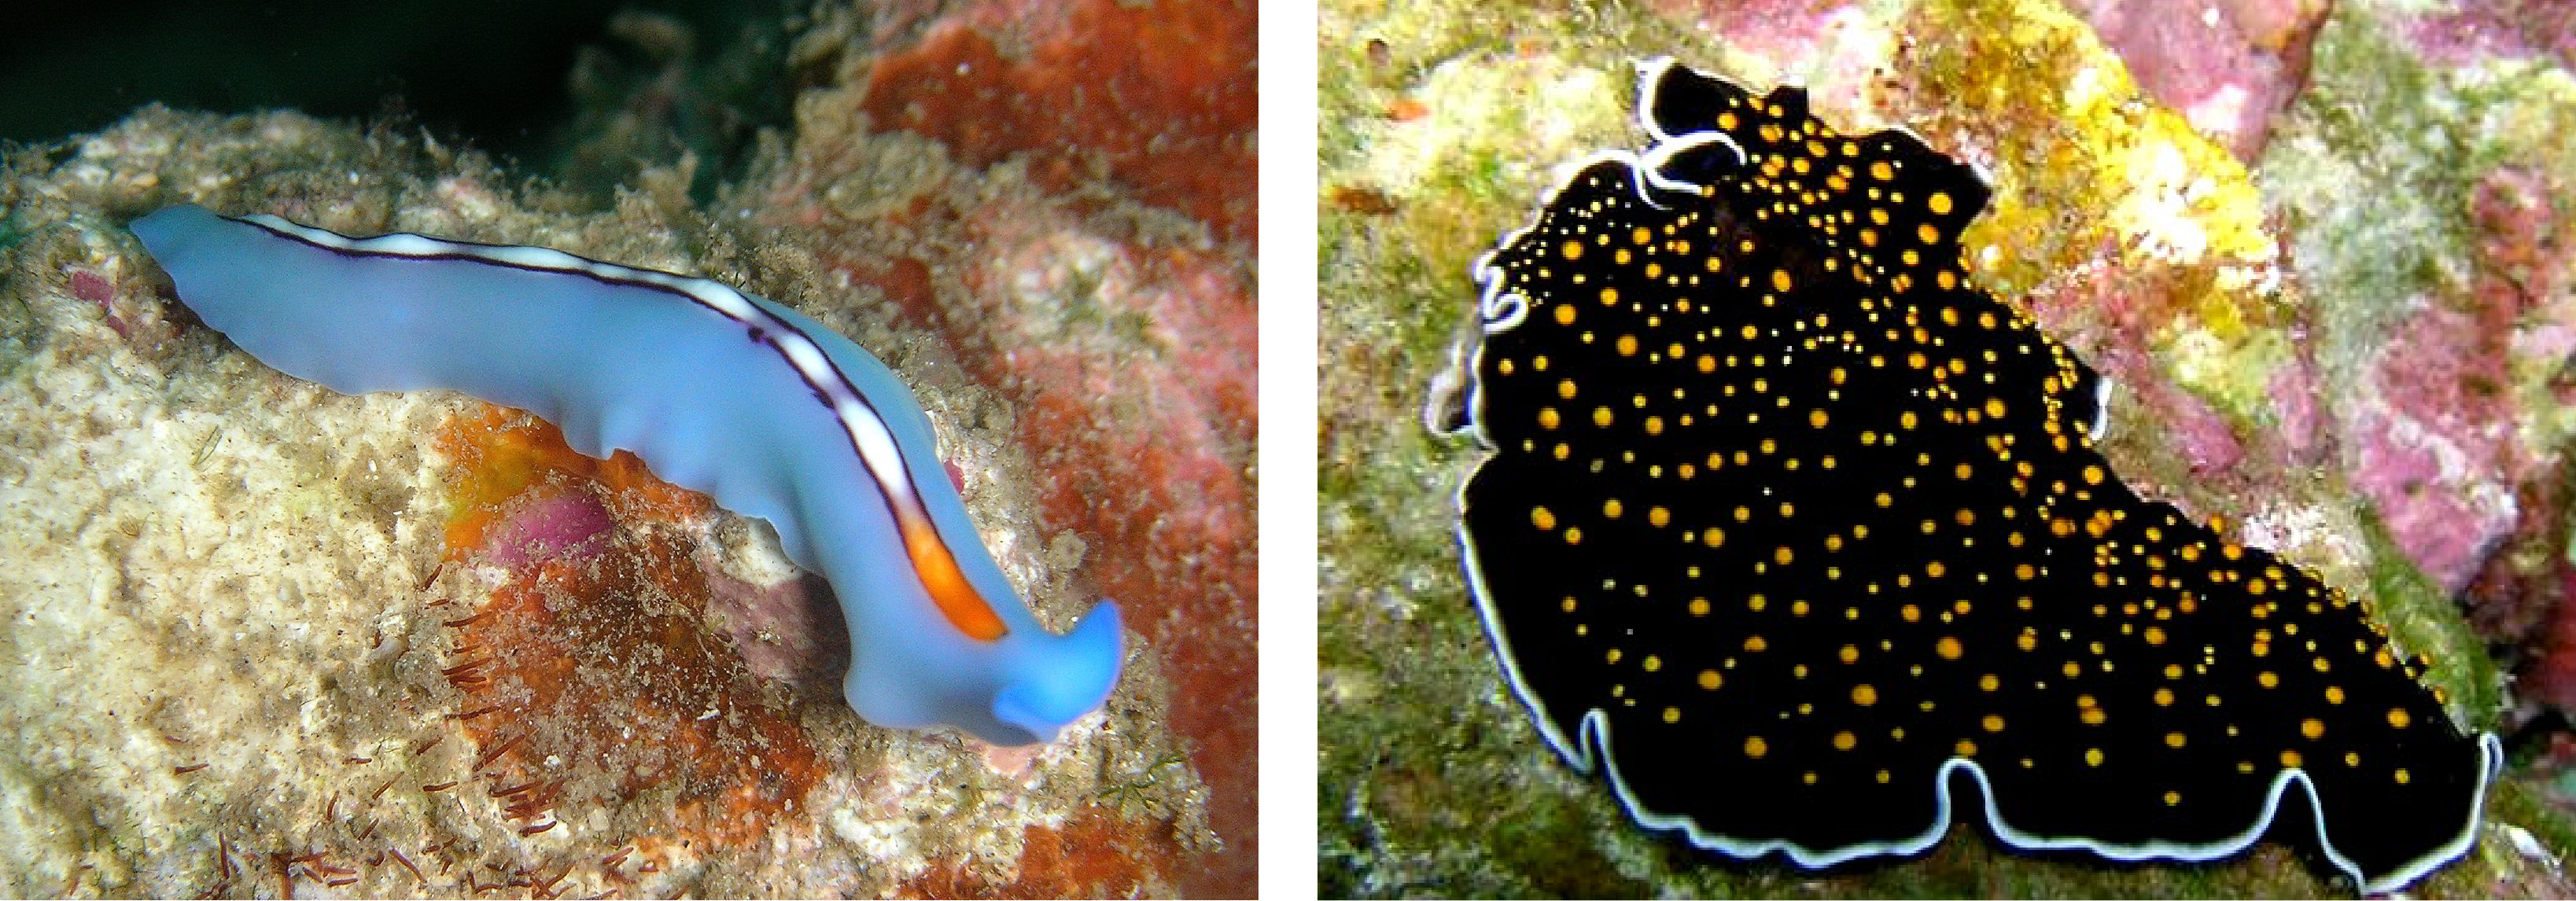 This image shows two flatworms with significant physical diversity.